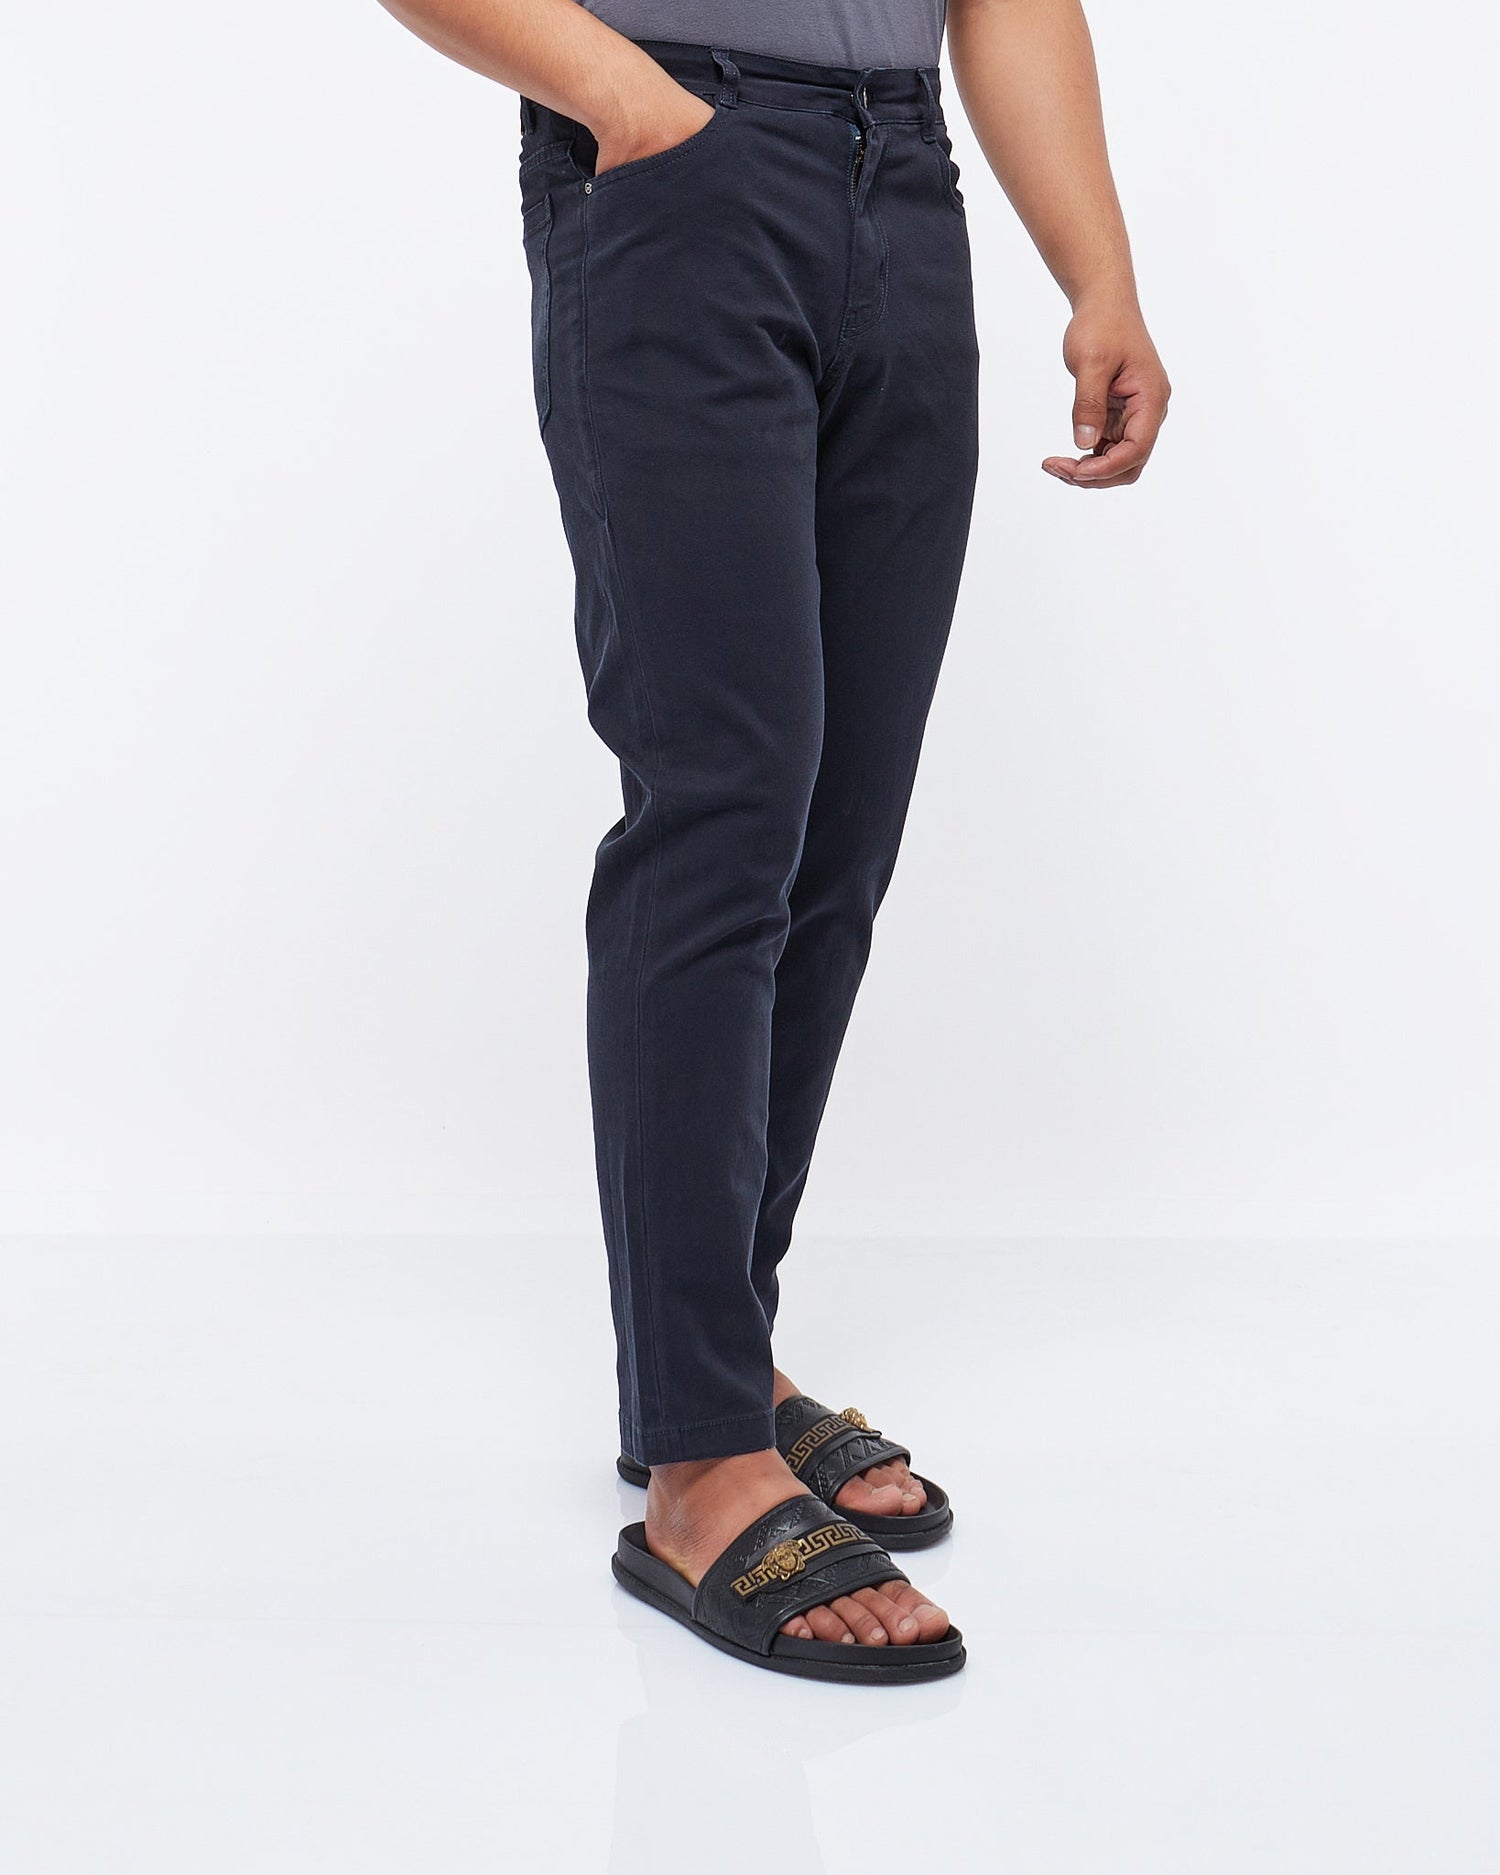 MOI OUTFIT-Stretchy Men Jeans 23.90